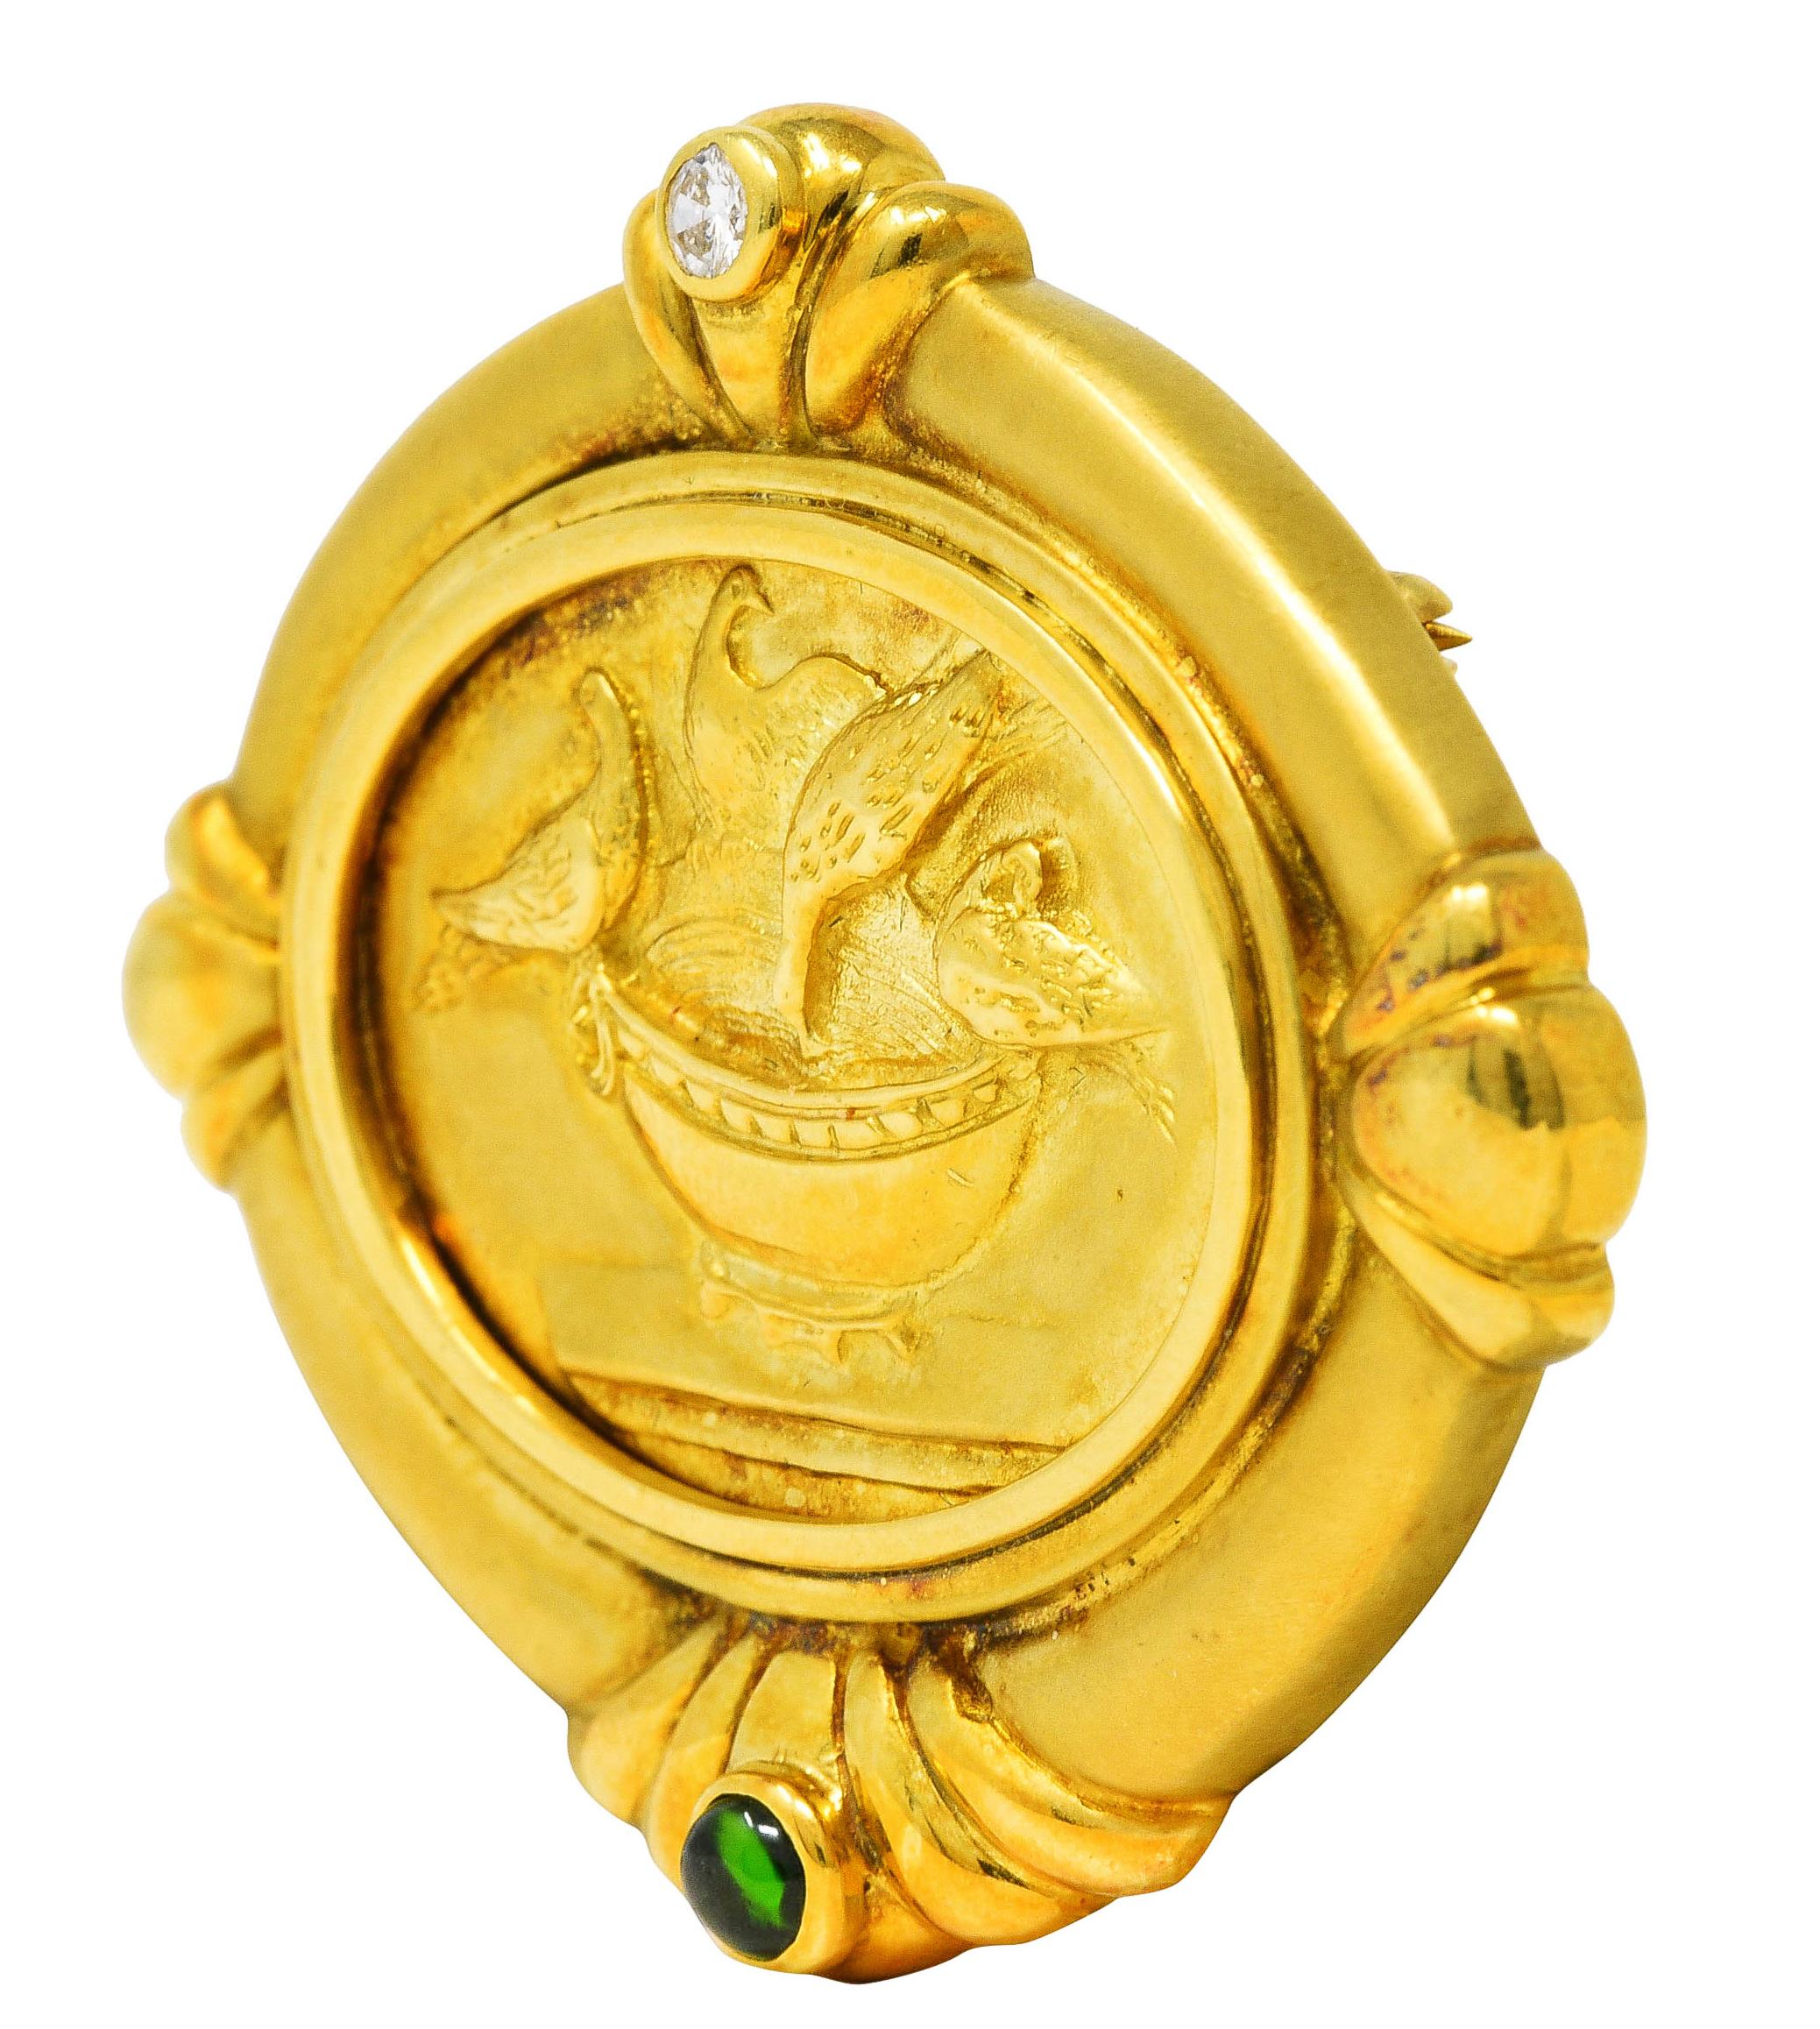 Brooch centers a highly rendered gold cameo of four doves in a bird bath on a pedestal

With decorative fluted gold frame surround featuring a bezel set round brilliant cut diamond

Weighing approximately 0.10 carat total - eye clean and